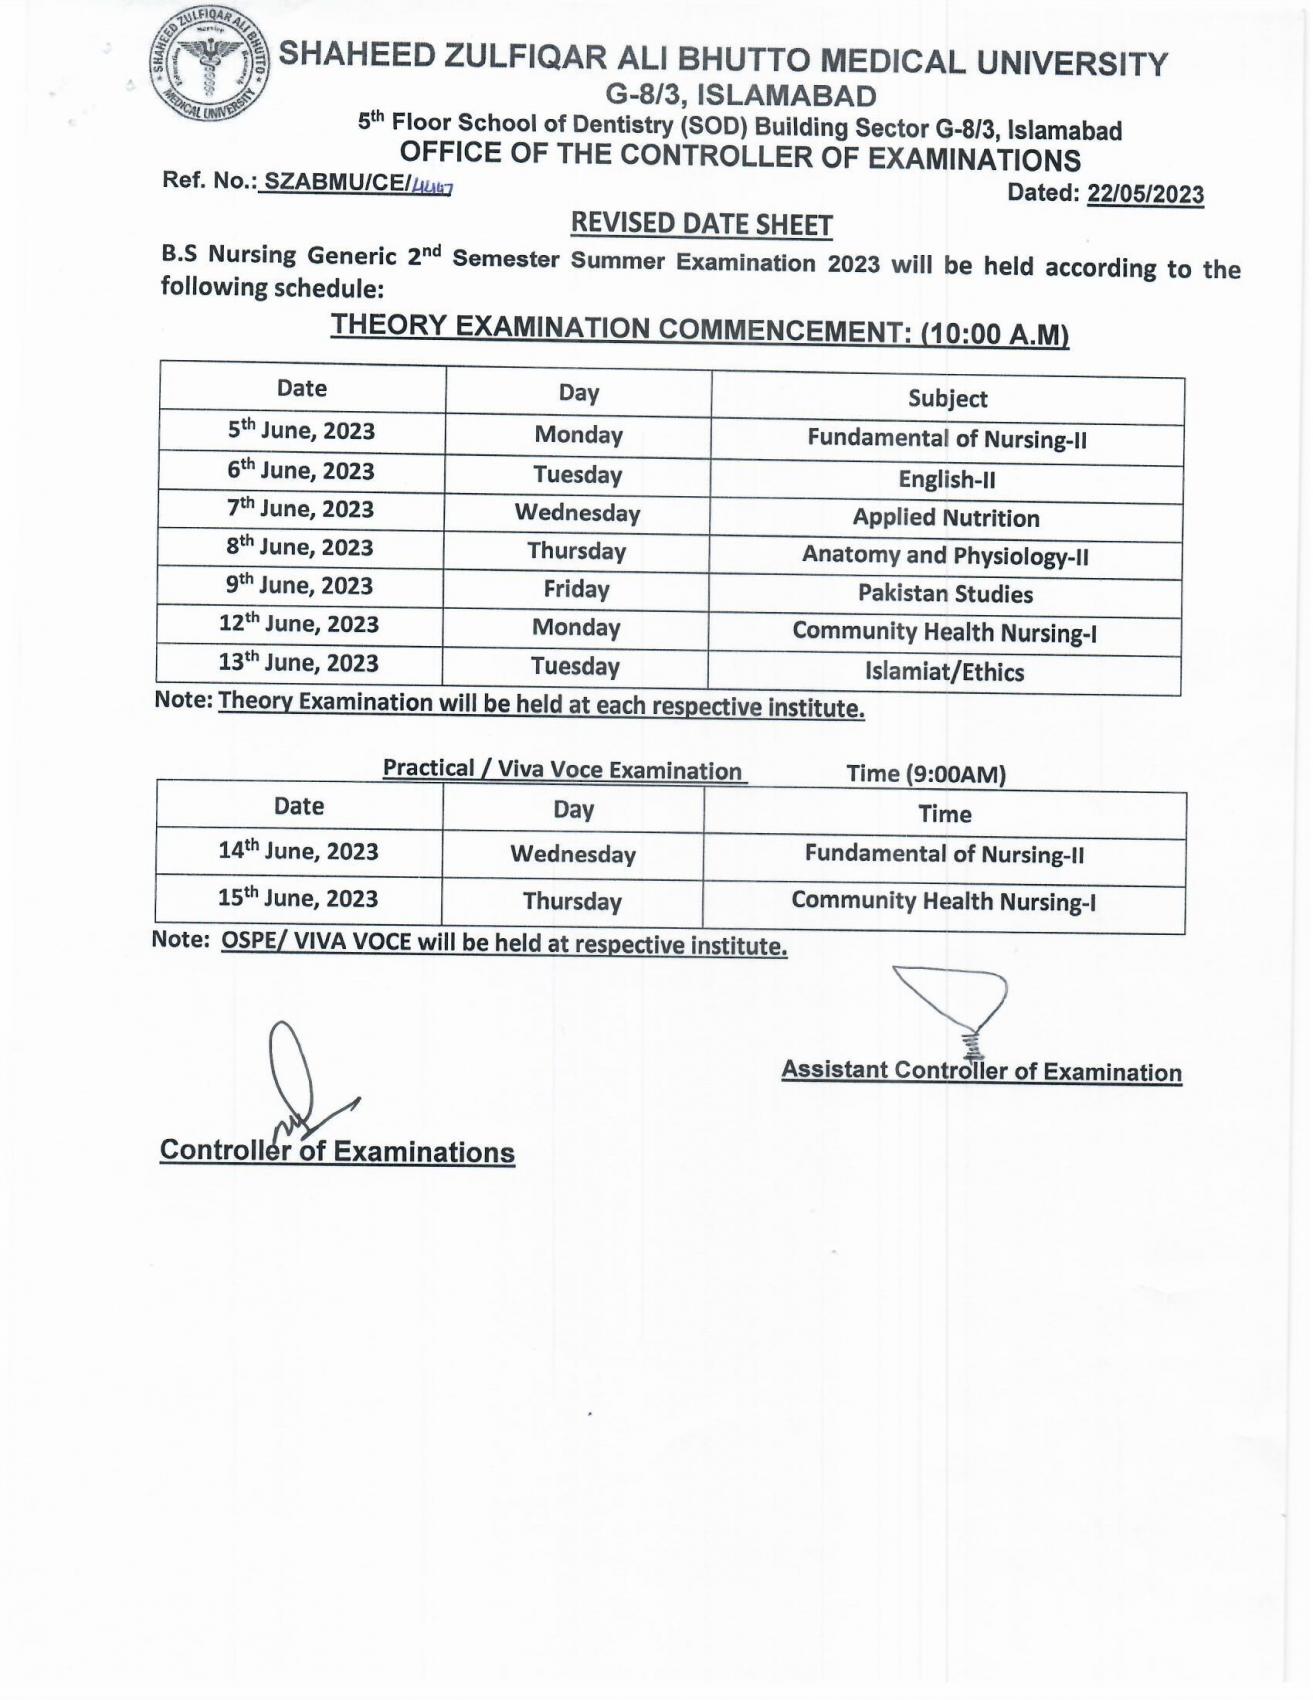 Revised Date Sheet - BS Nursing 2nd and 4th Semester Summer Examination 2023